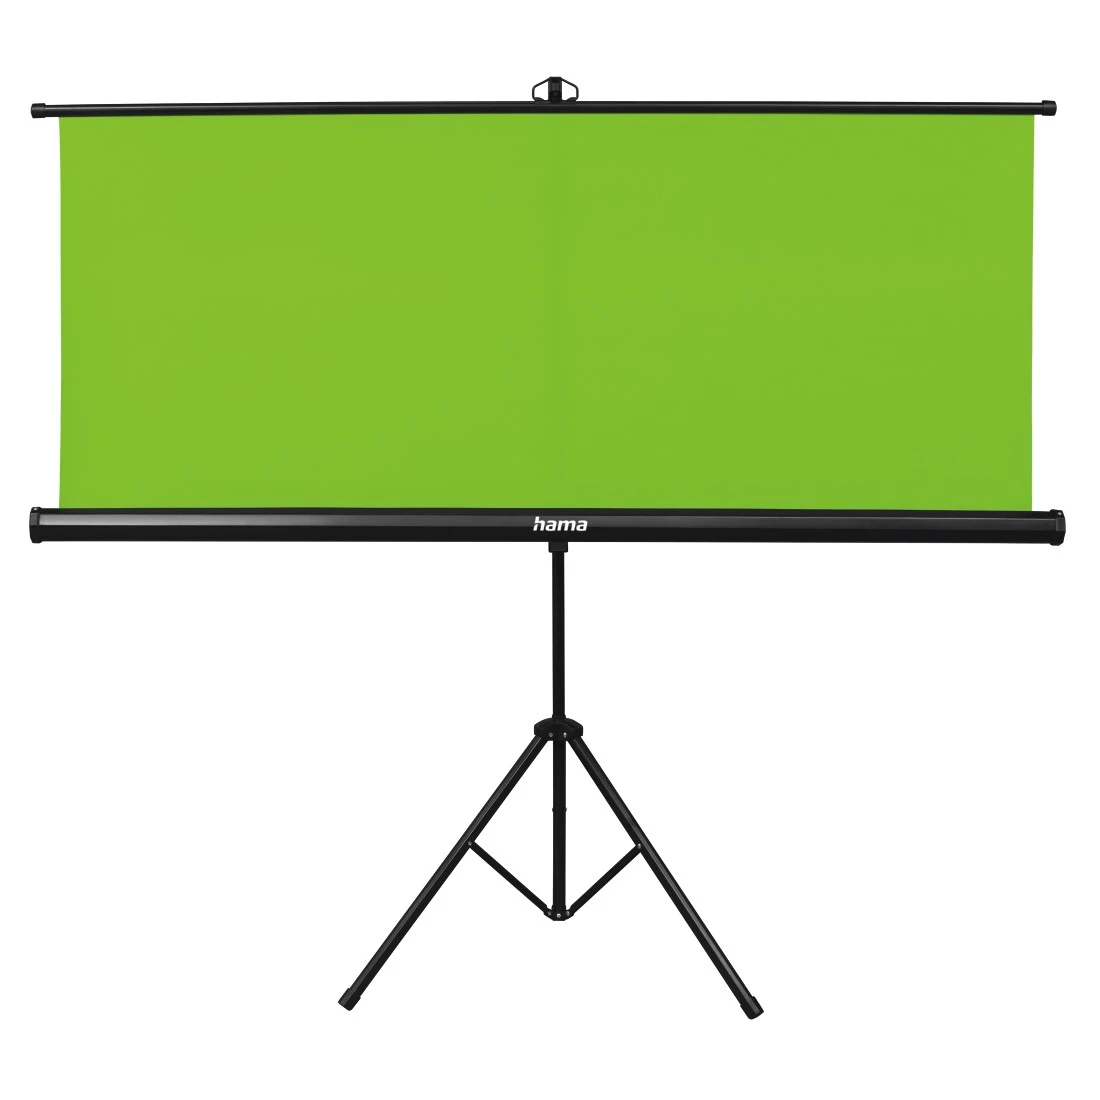 Hama in | with Green x 180 cm, 1 Tripod, 2 Screen 180 Background